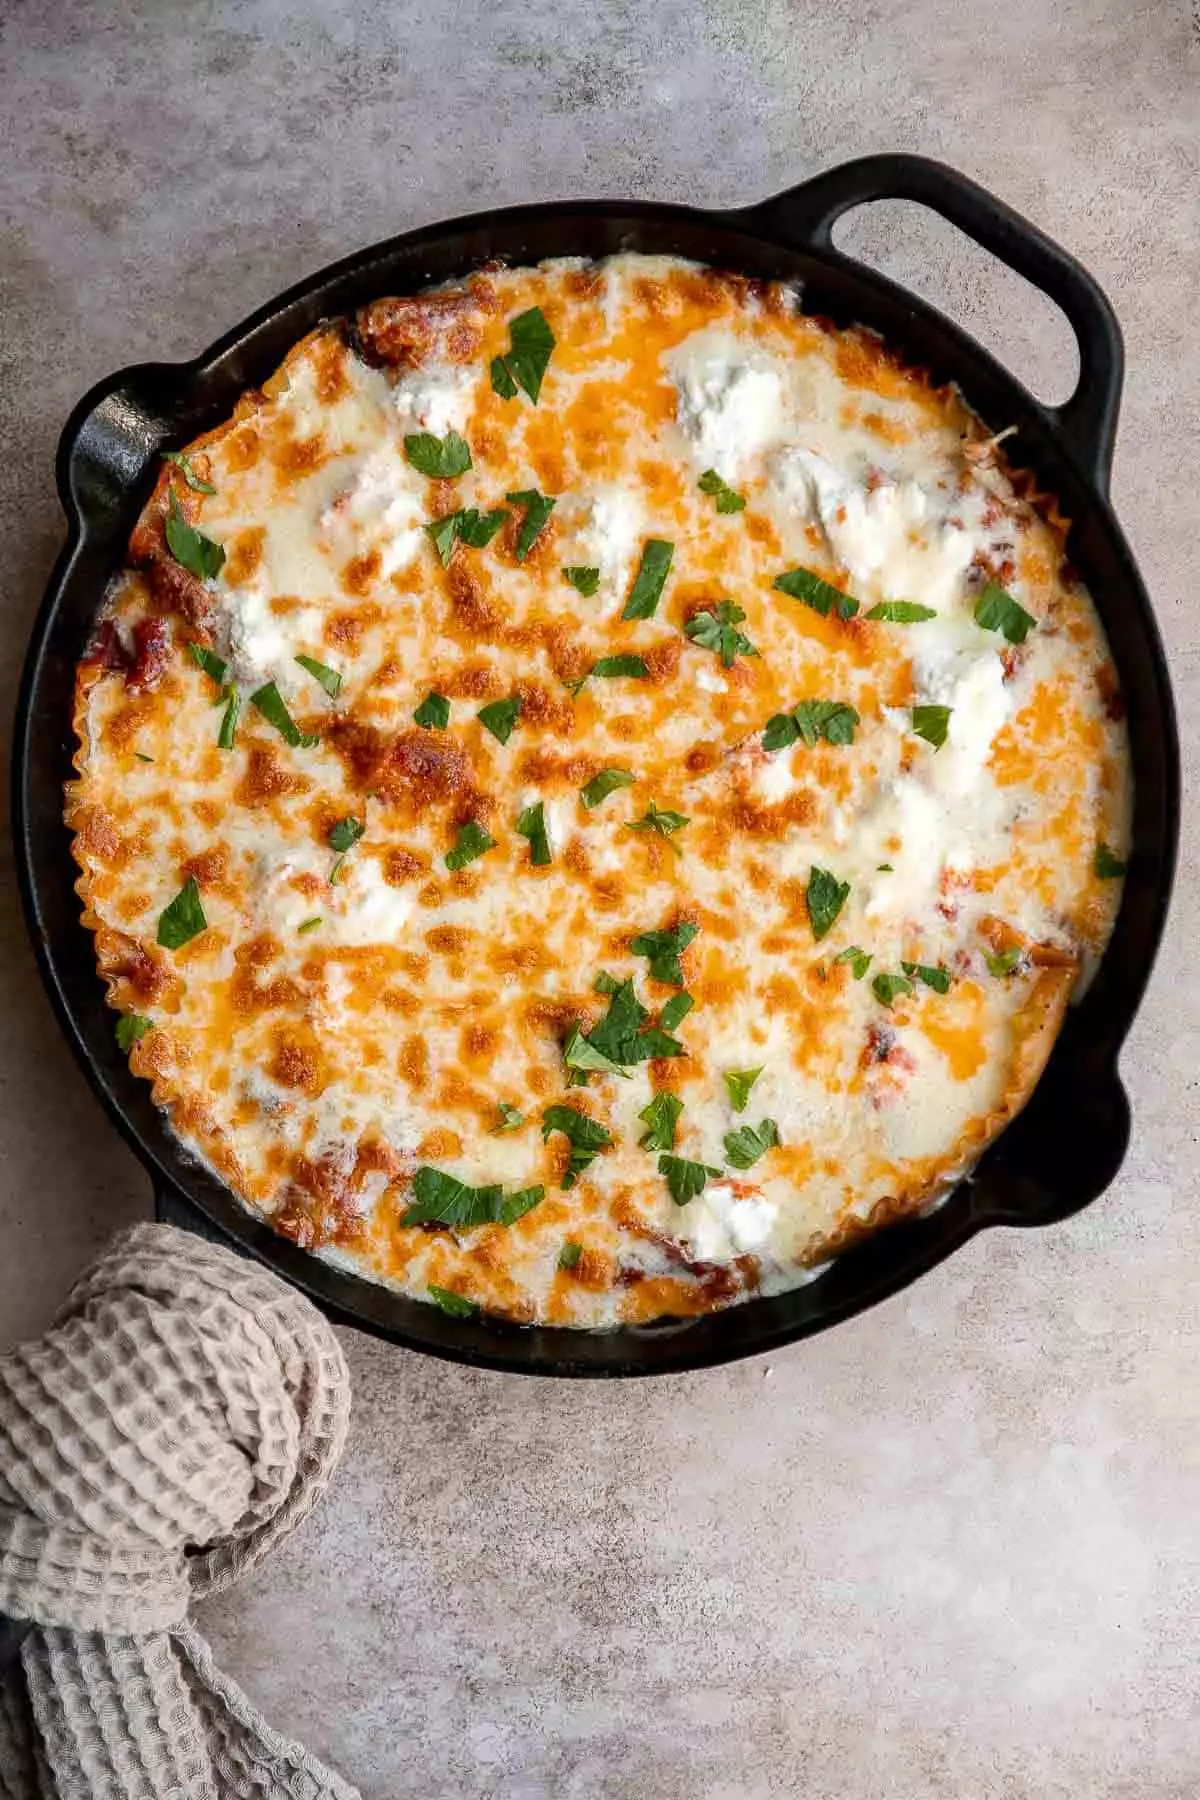 This one-pan skillet lasagna has all the same ingredients and flavors as a traditional meat lasagna but with minimal prep and is ready in just 40 minutes.